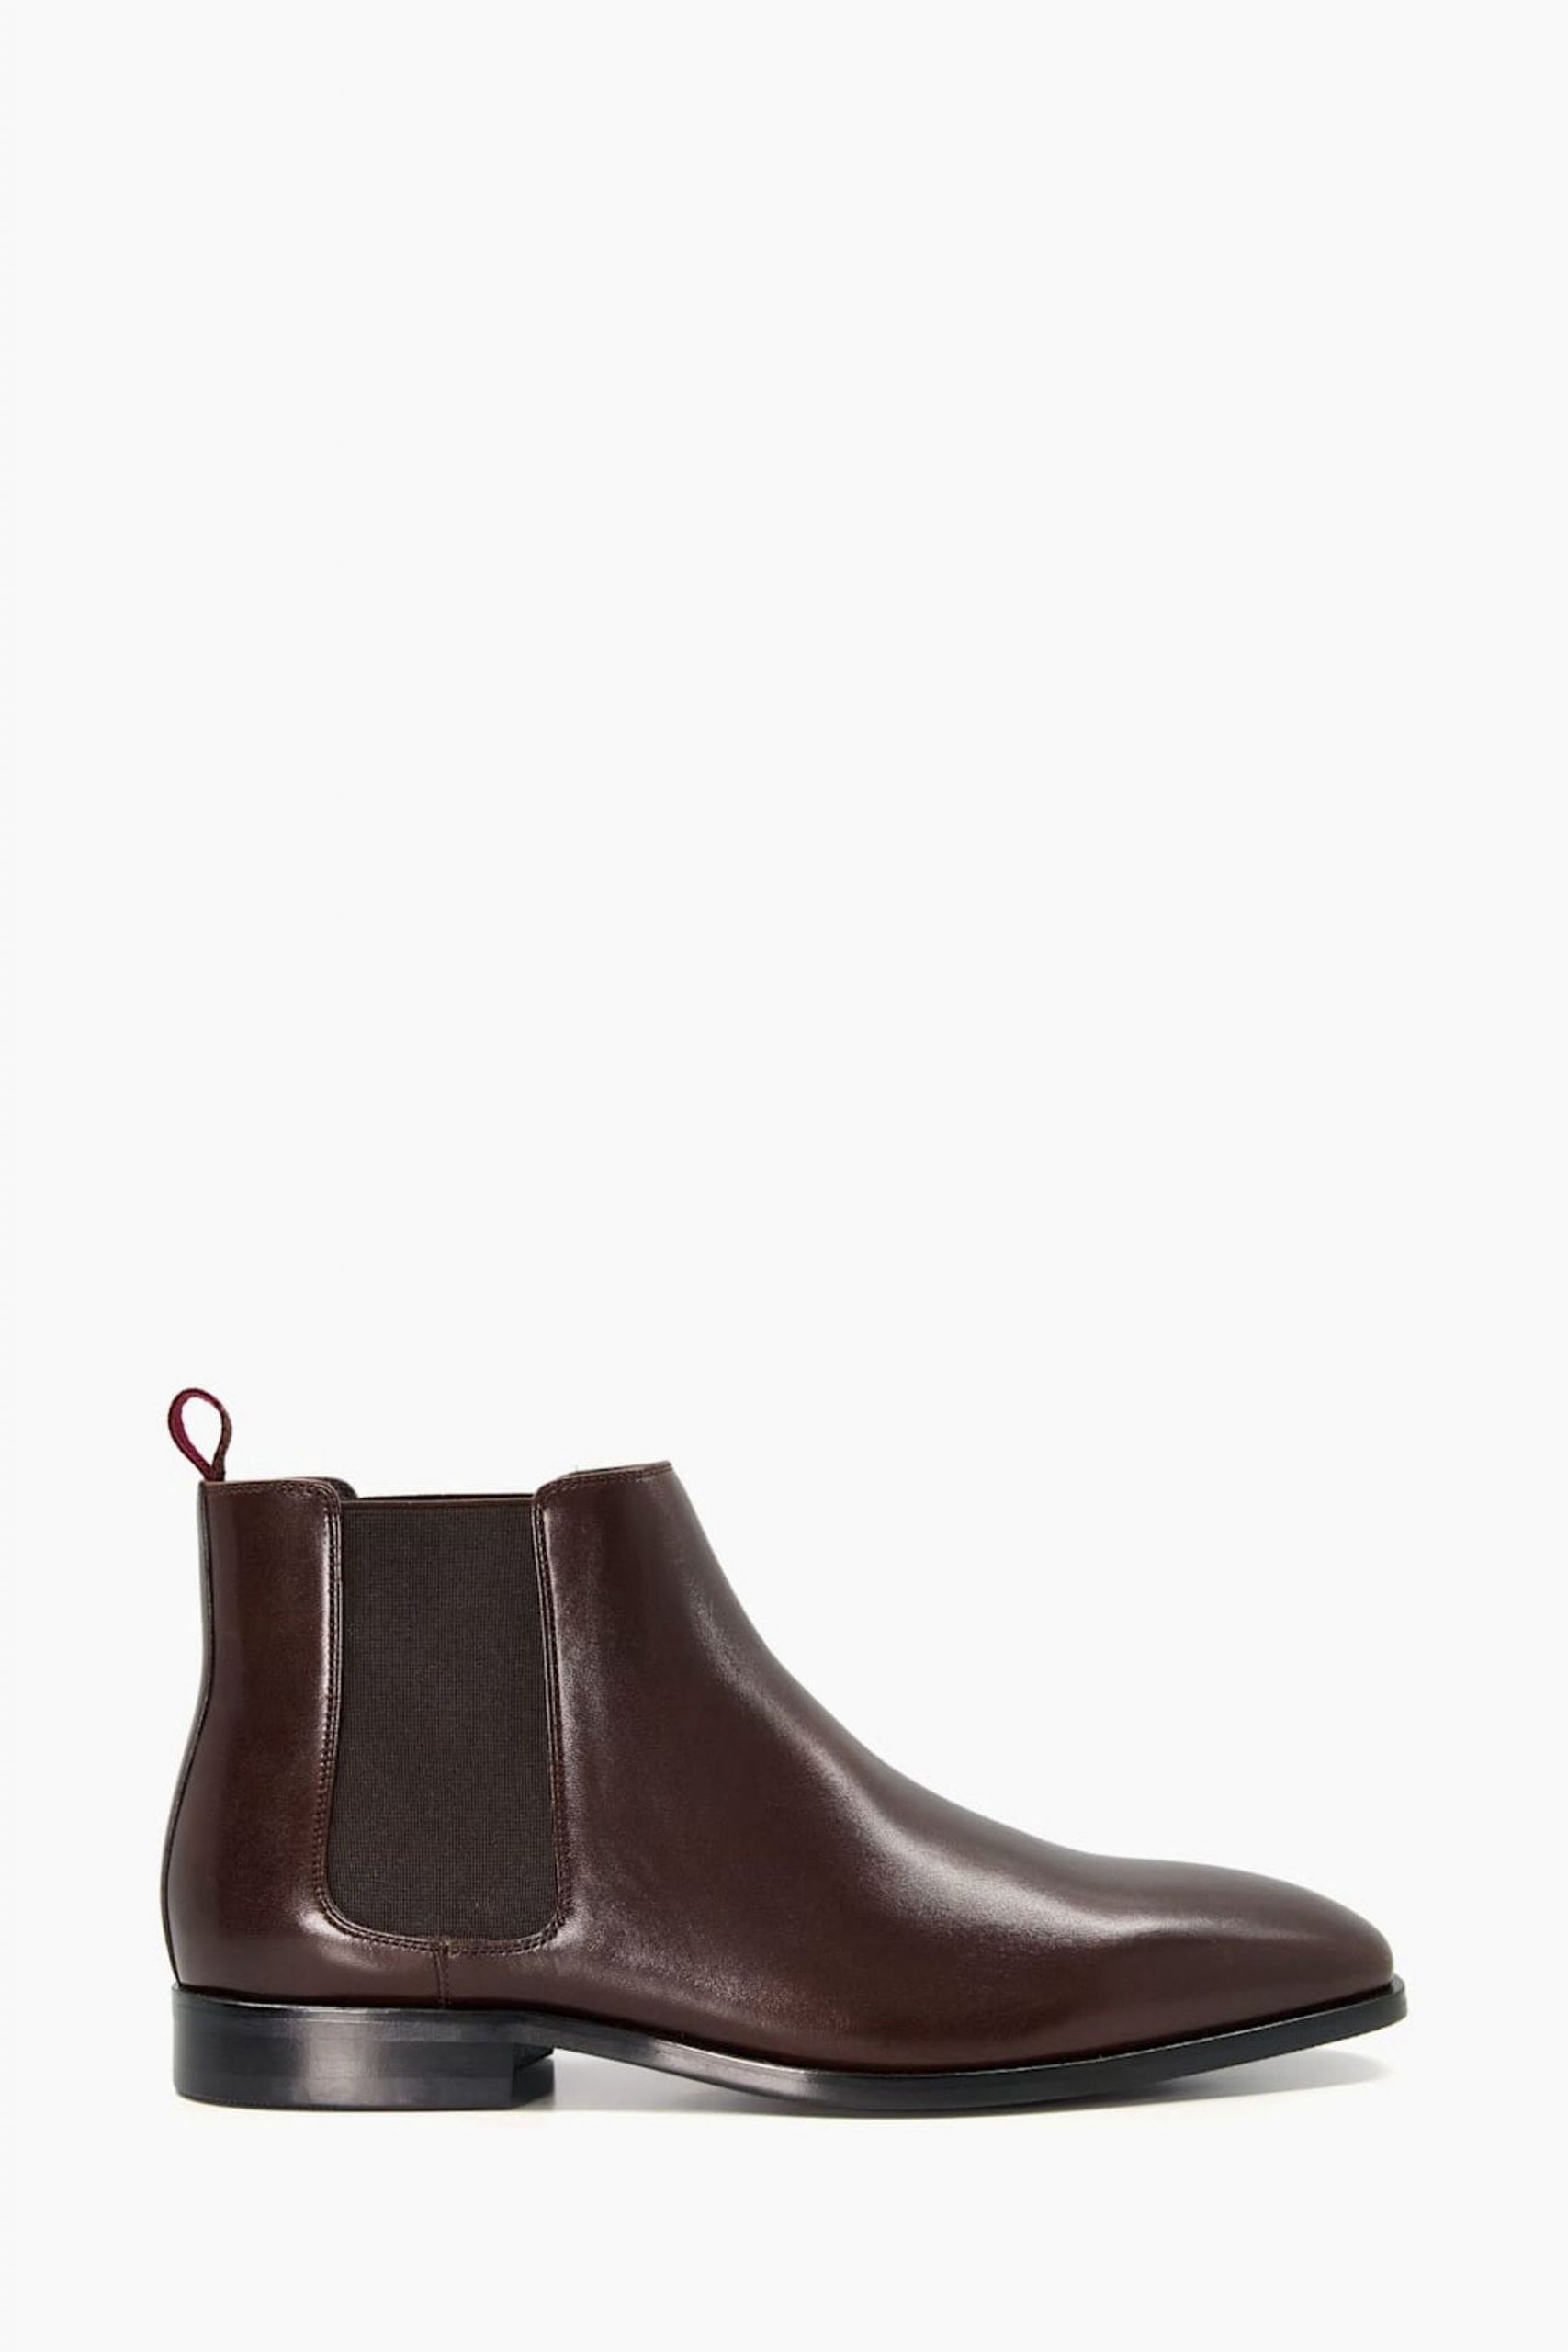 New Threads Dune London Mantle Chelsea Brown Boots incredible prices at ...